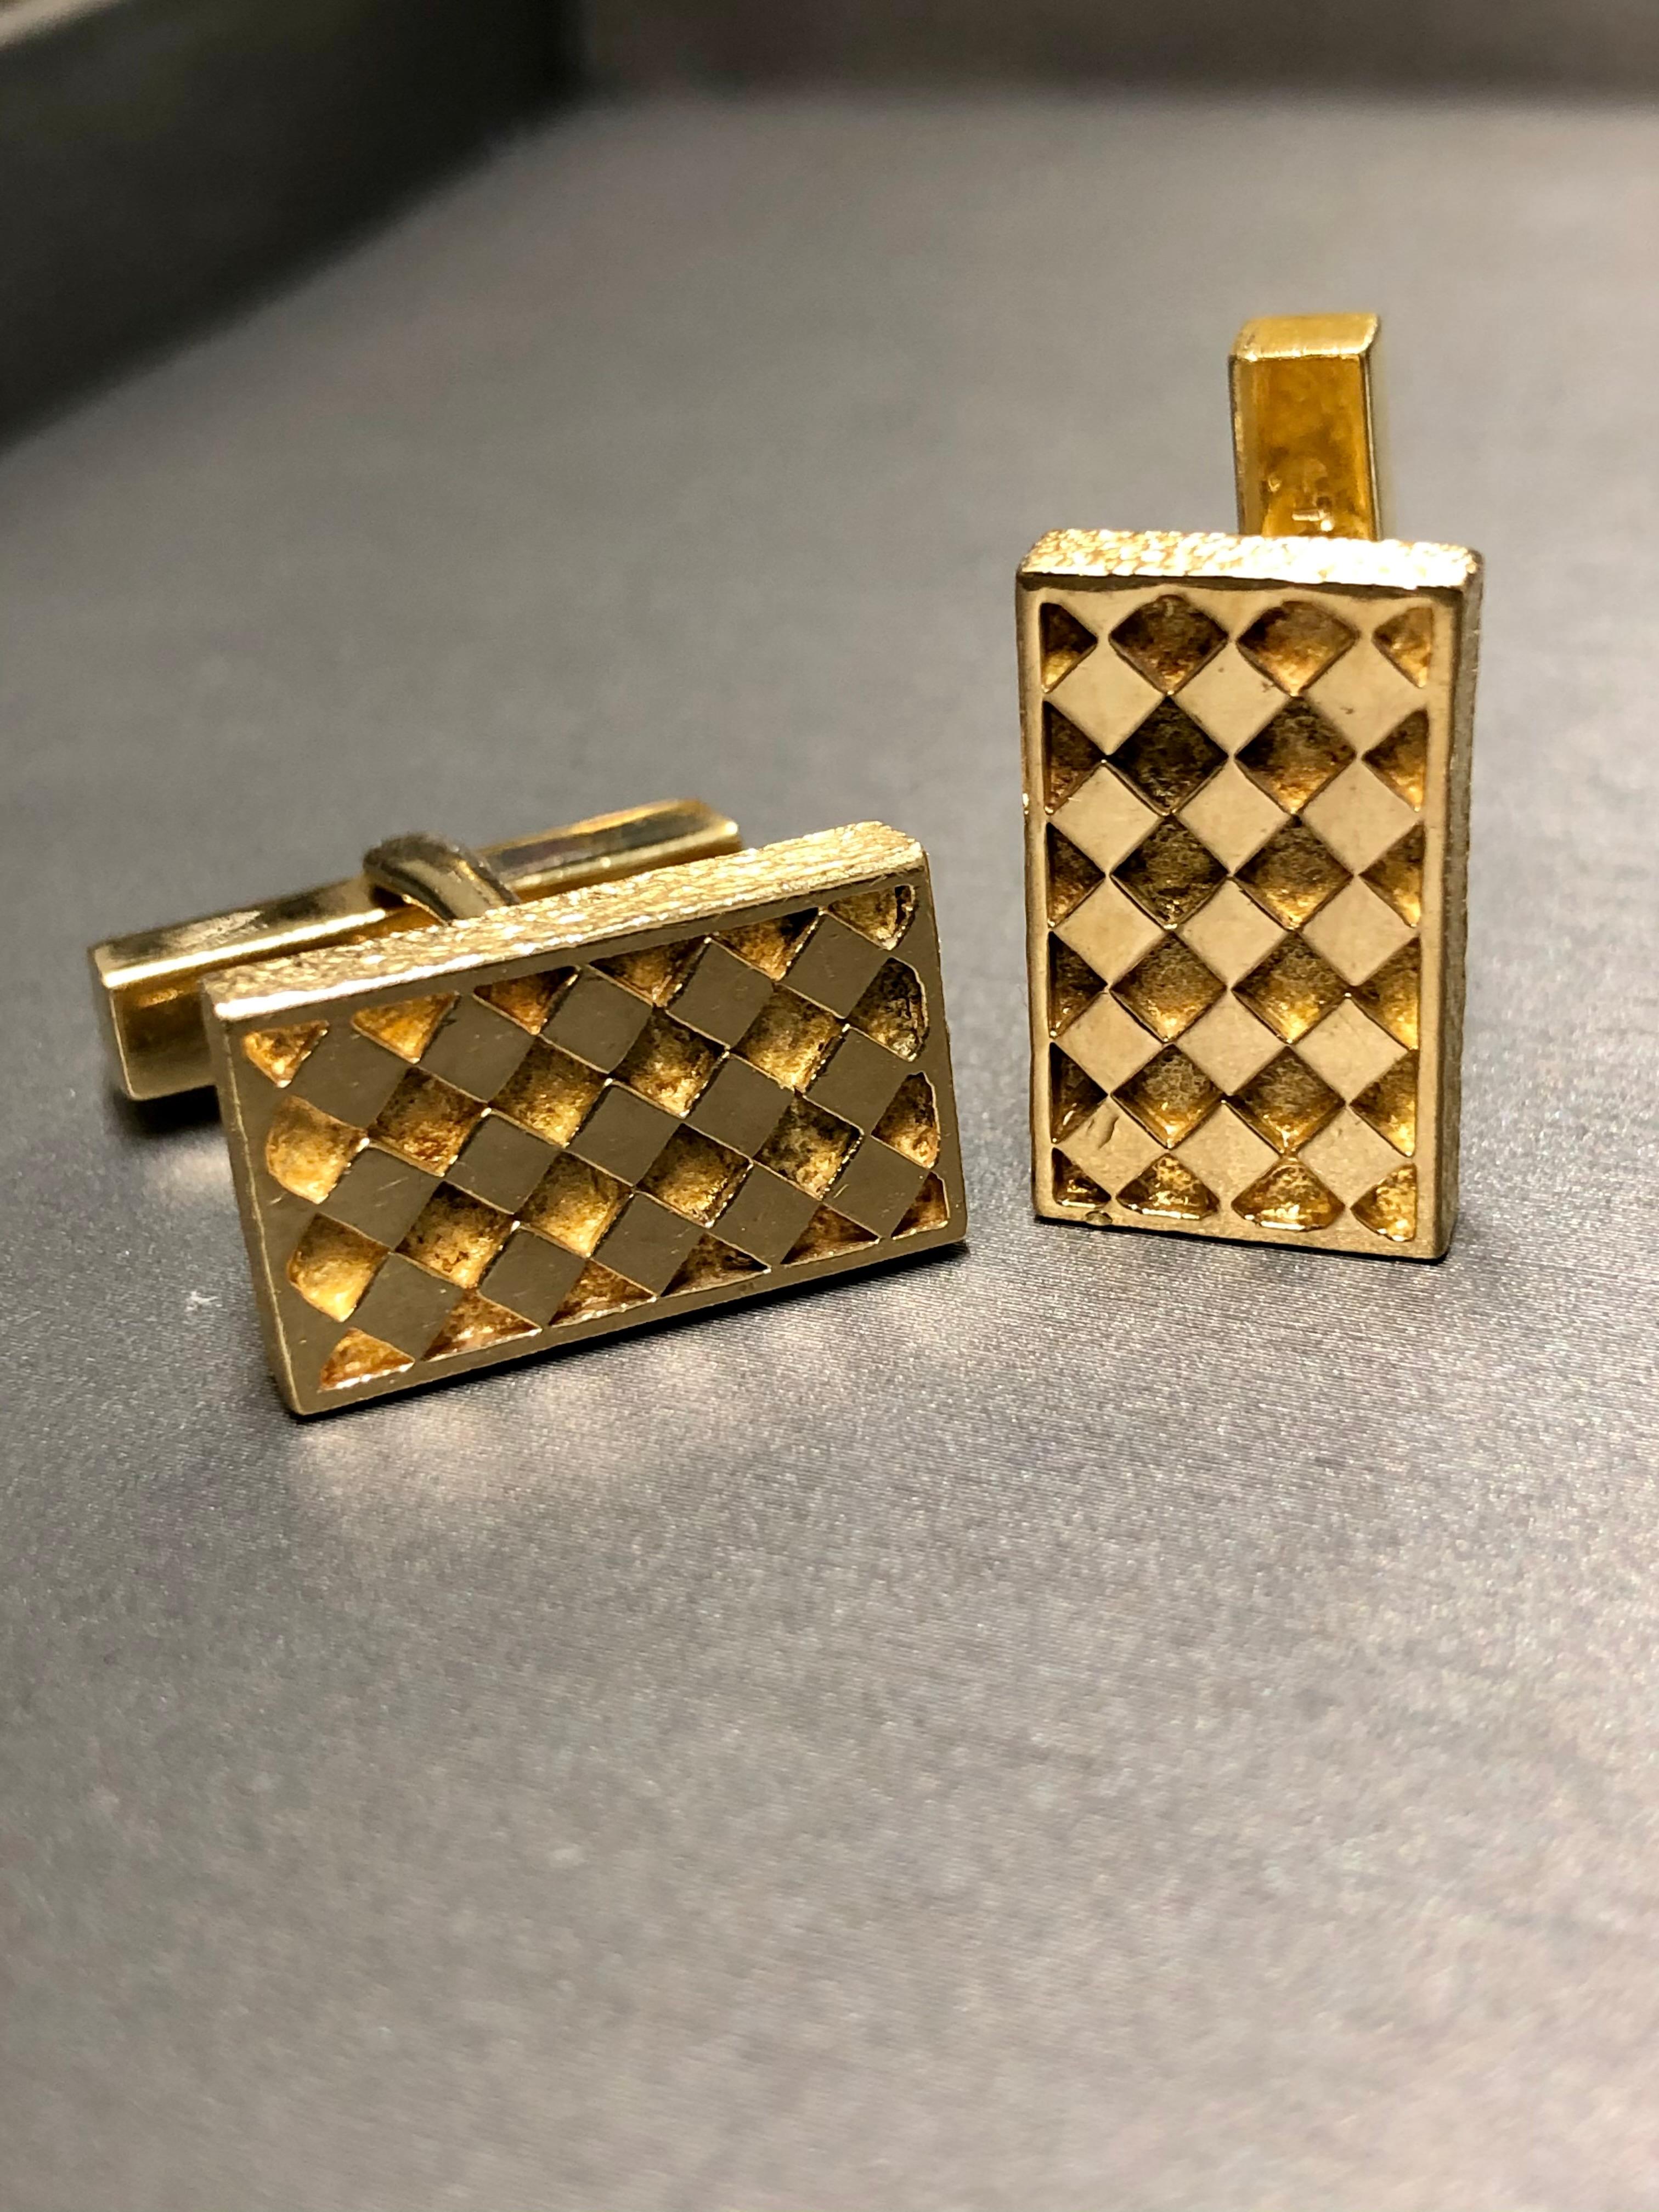 handsome pair of vintage yellow gold cufflinks c. the 1960’s done in 18K by Tiffany & Co.


Dimensions/Weight:

Cufflinks measure .70” long by .45” wide and weigh 21.1g.


Condition:

Hinged portion functions well and hallmarks are present a